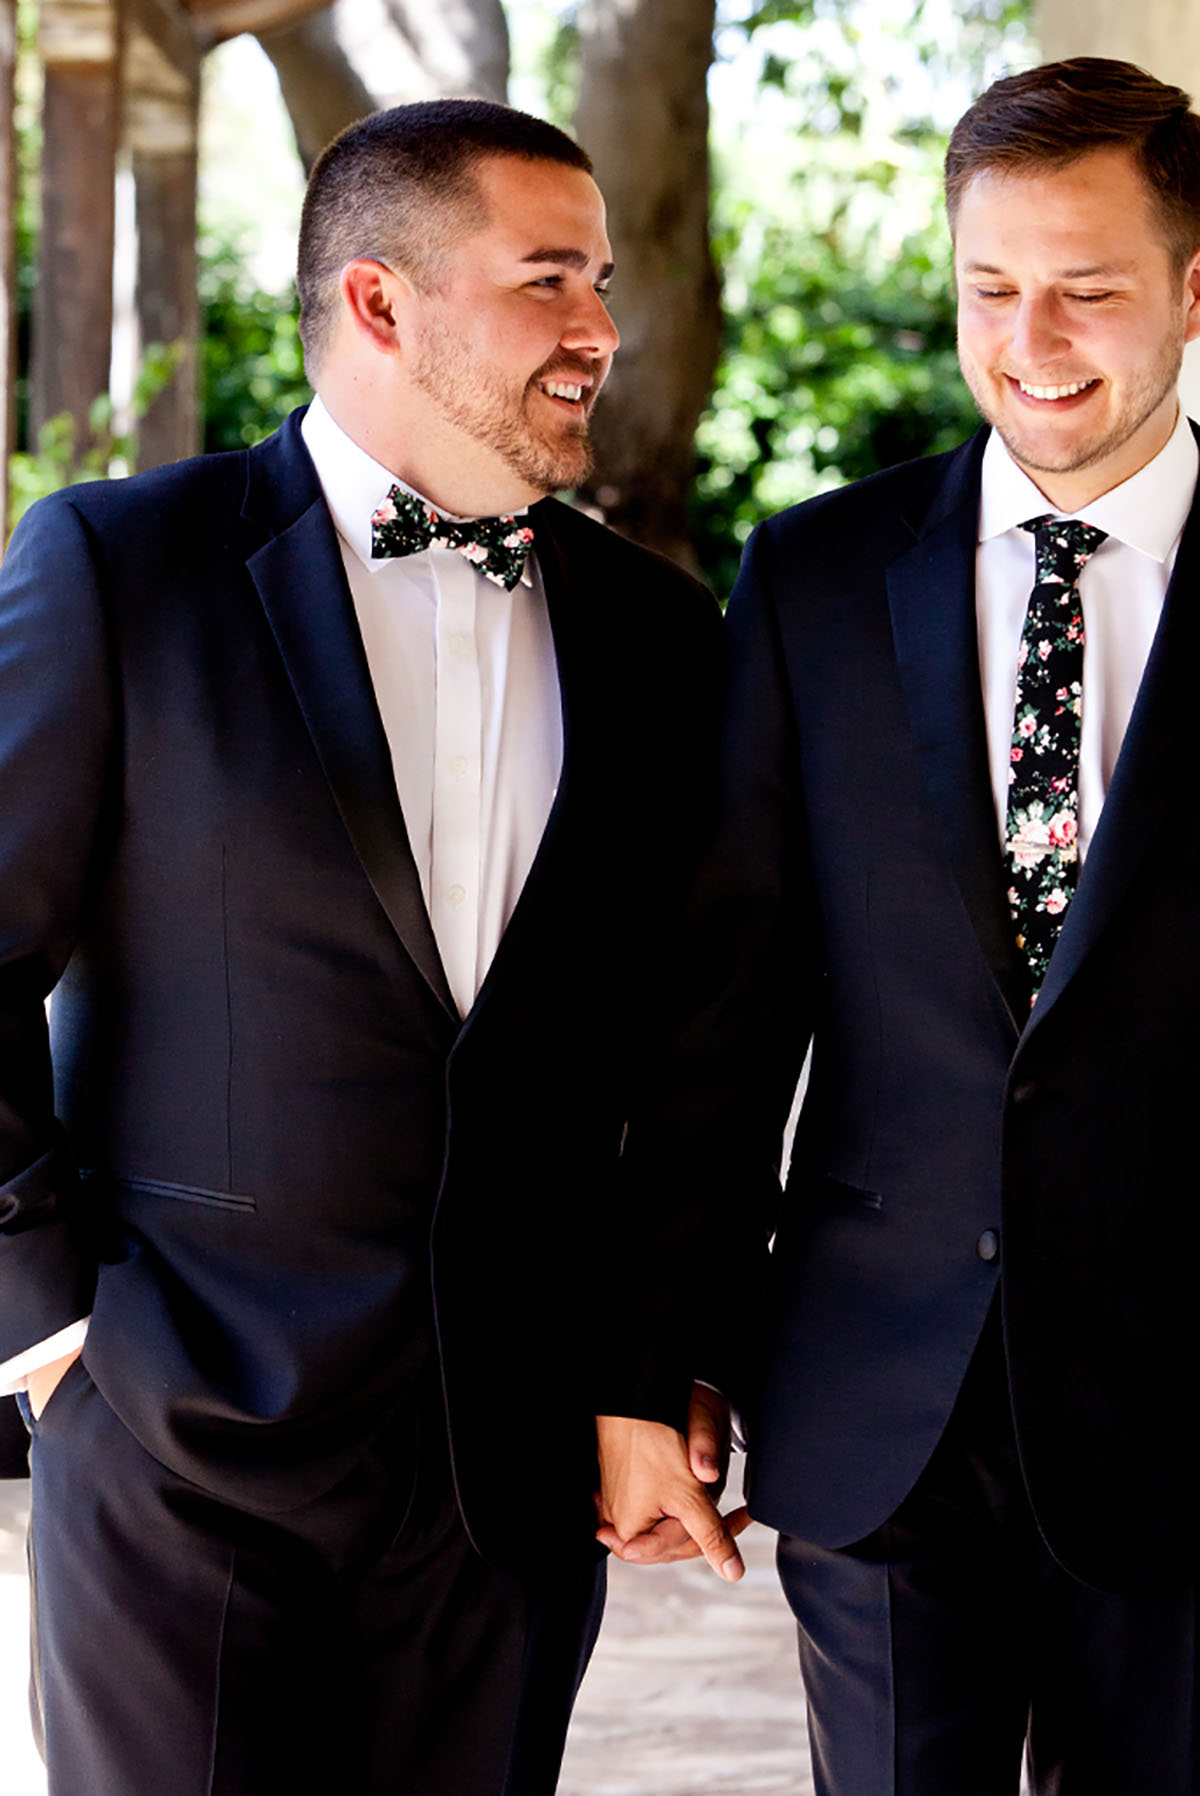 Gay wedding with Spanish Adobe theme in spring colors two grooms